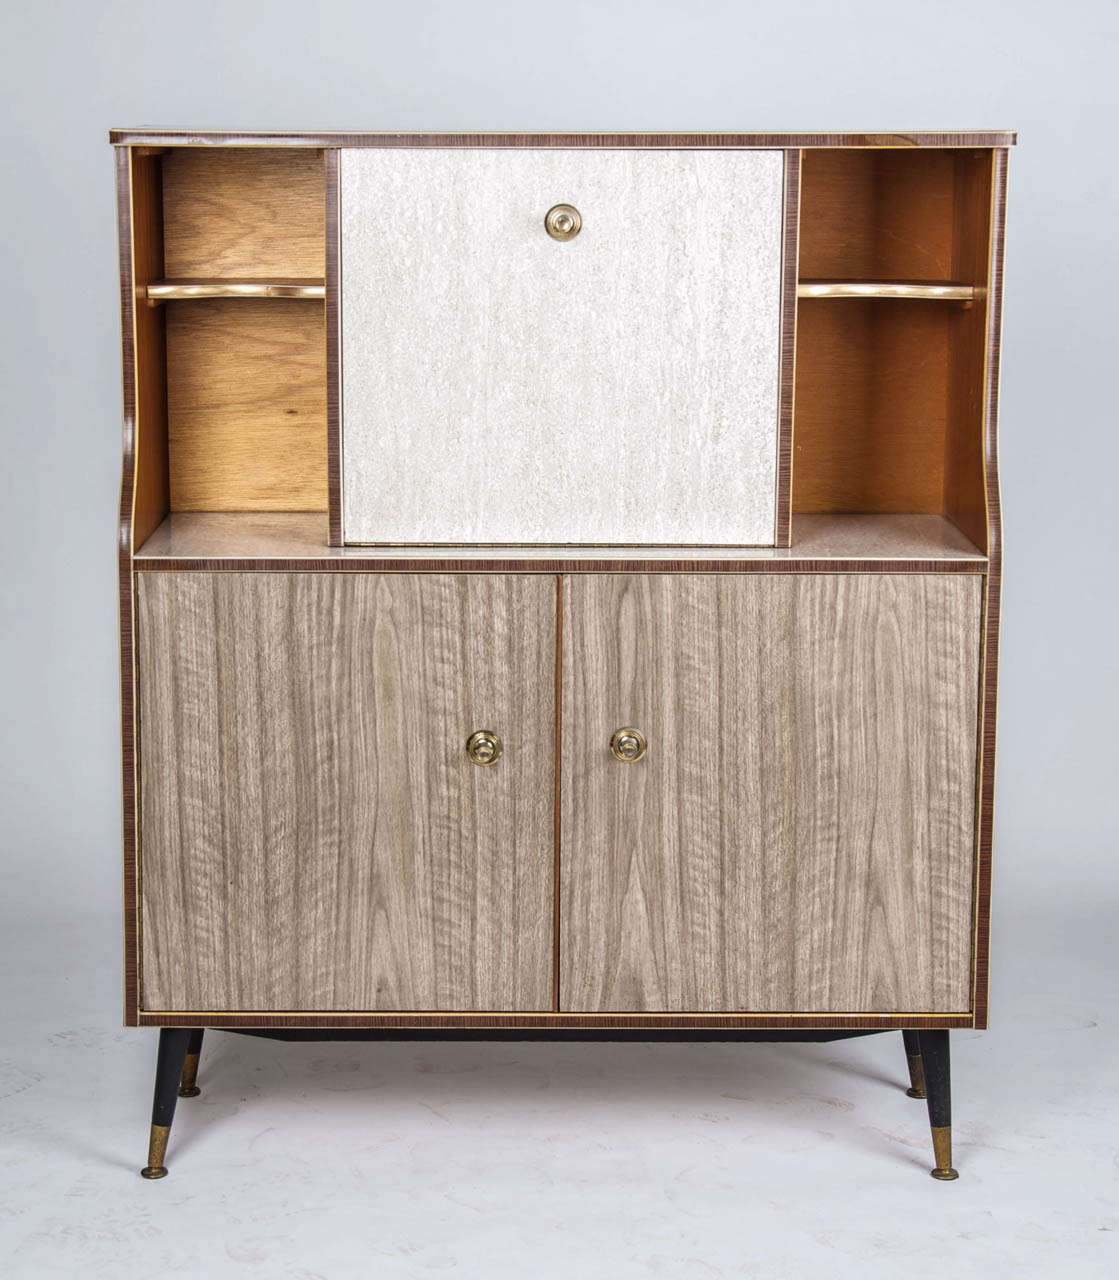 A 1960,s faux wood veneer sideboard in original condition, with one central pull down door cupboard door above a pair of pull open doors standing on ebonised feet capped in brass.